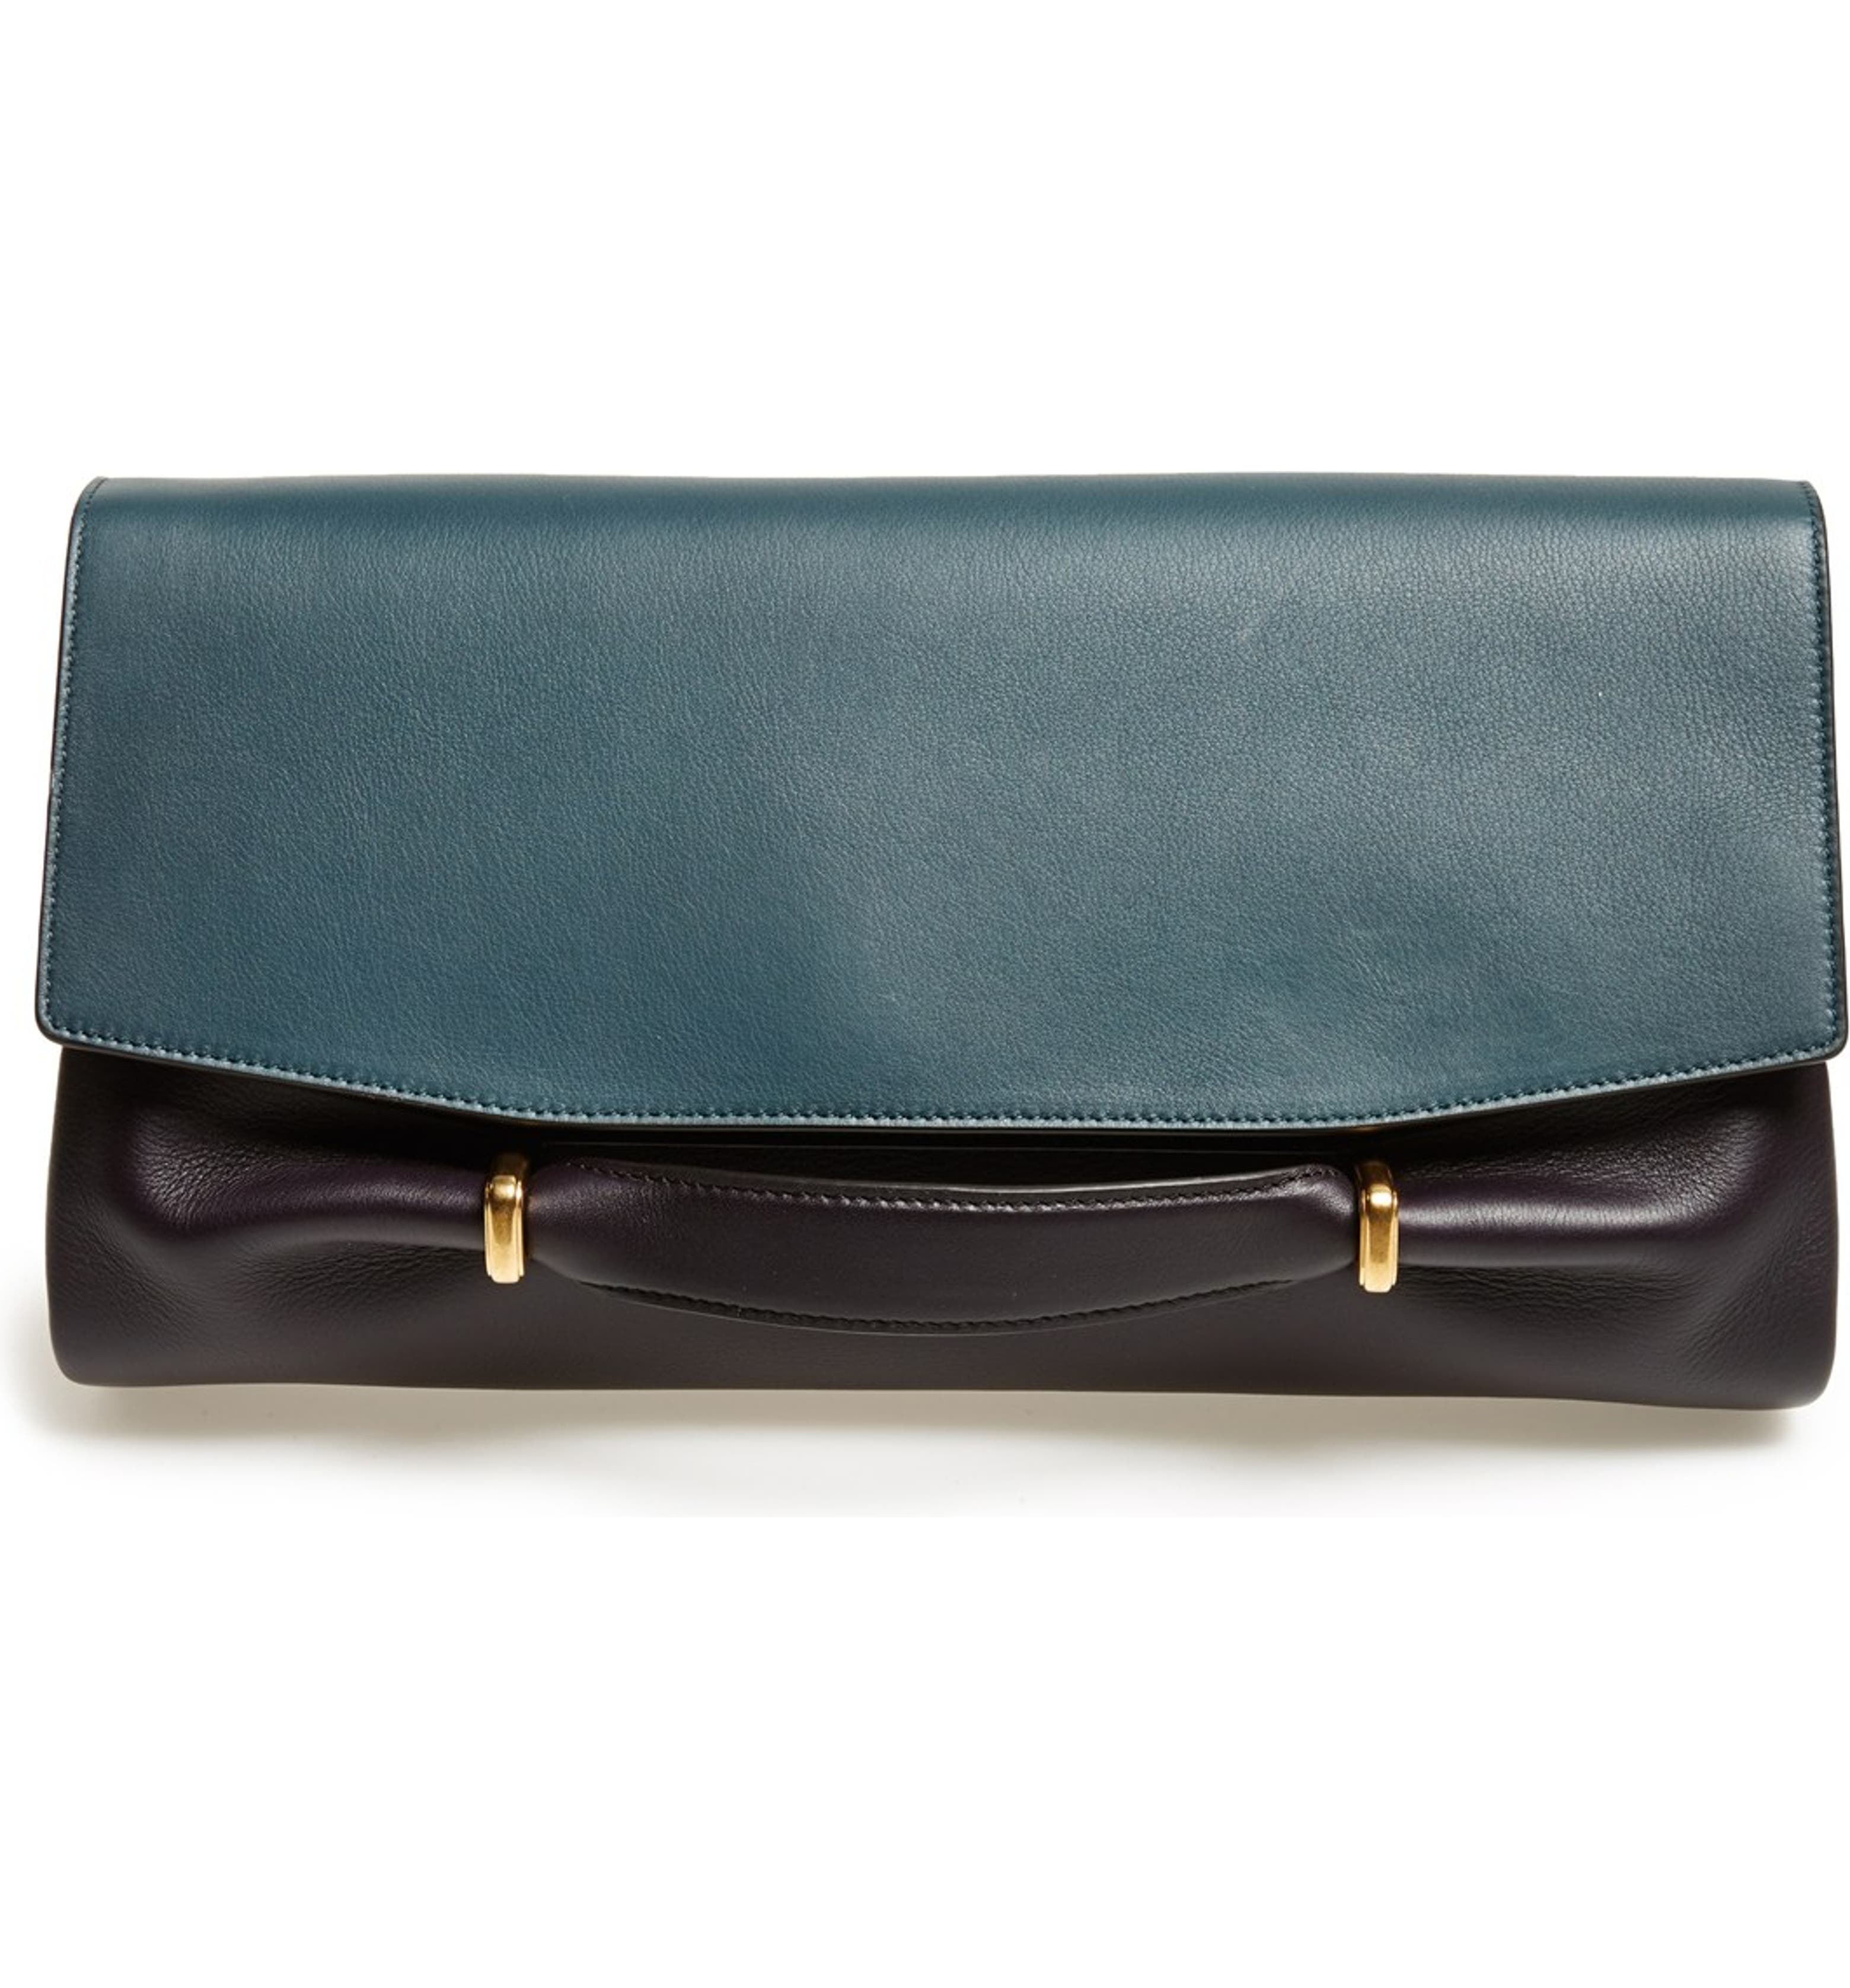 Nina Ricci 'Large Marche' Leather Clutch | Nordstrom